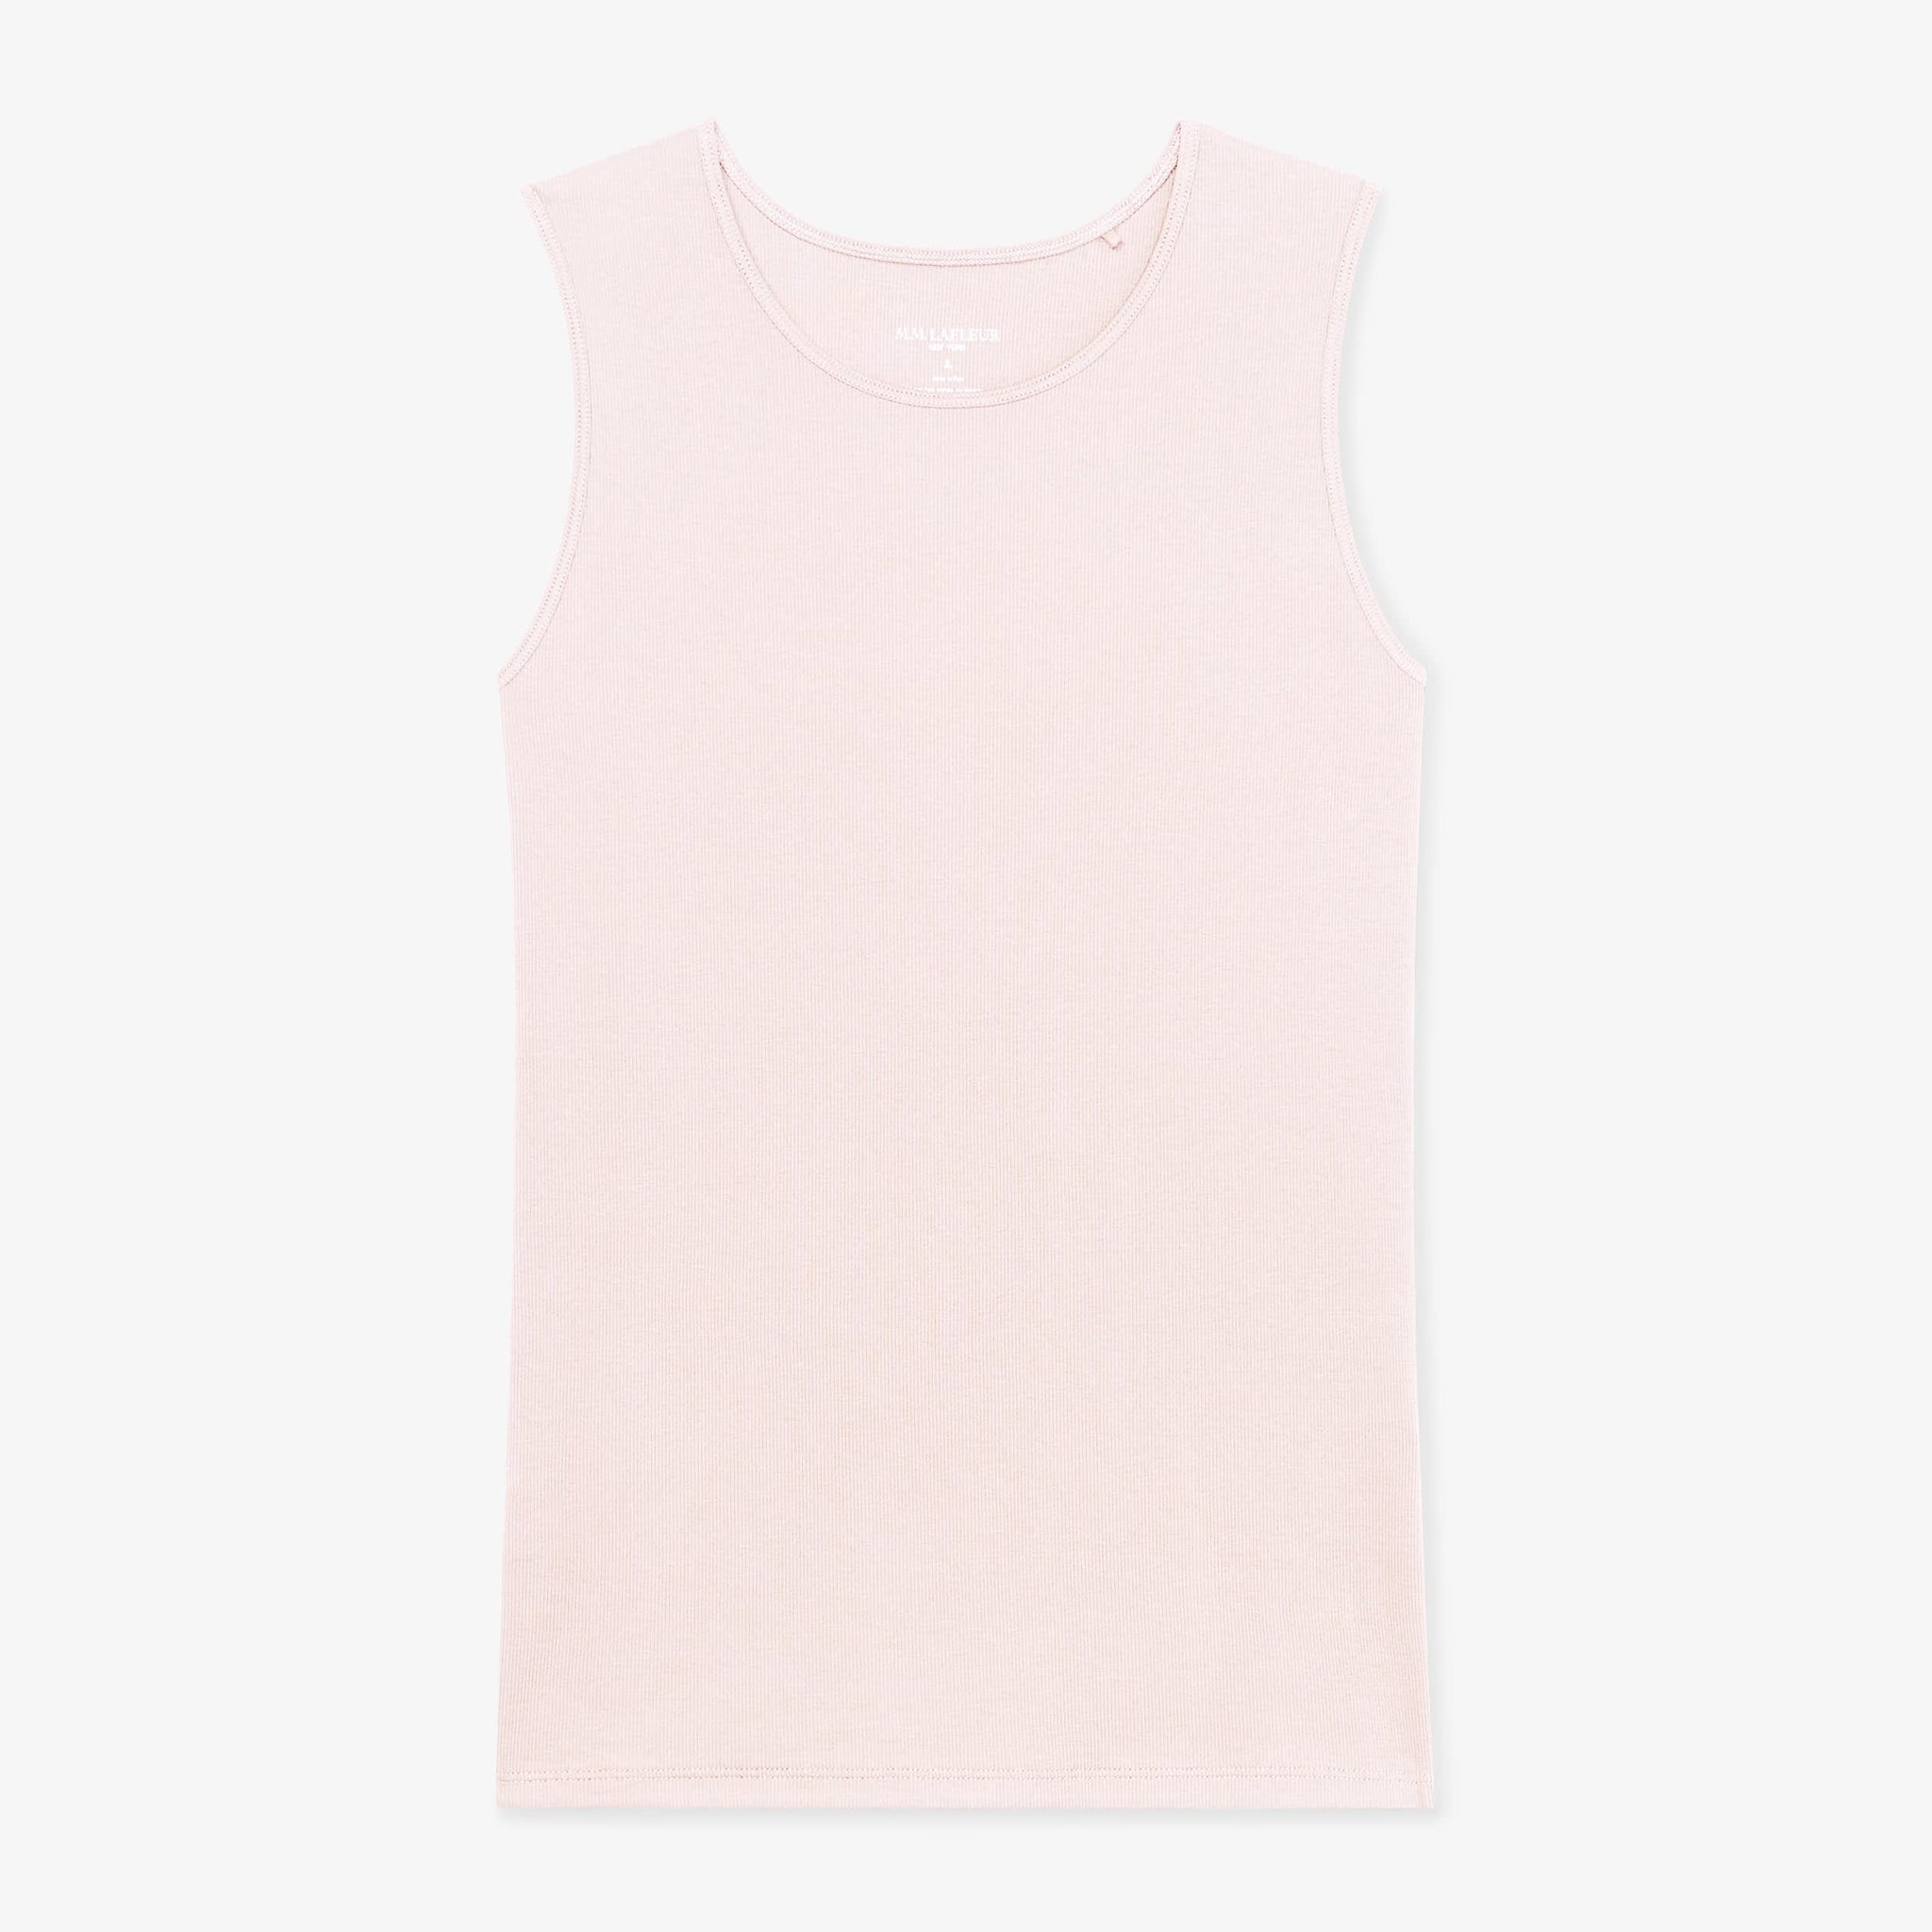 Packshot image of the Paige T-Shirt—Fine Ribbed Cotton in Soft Pink